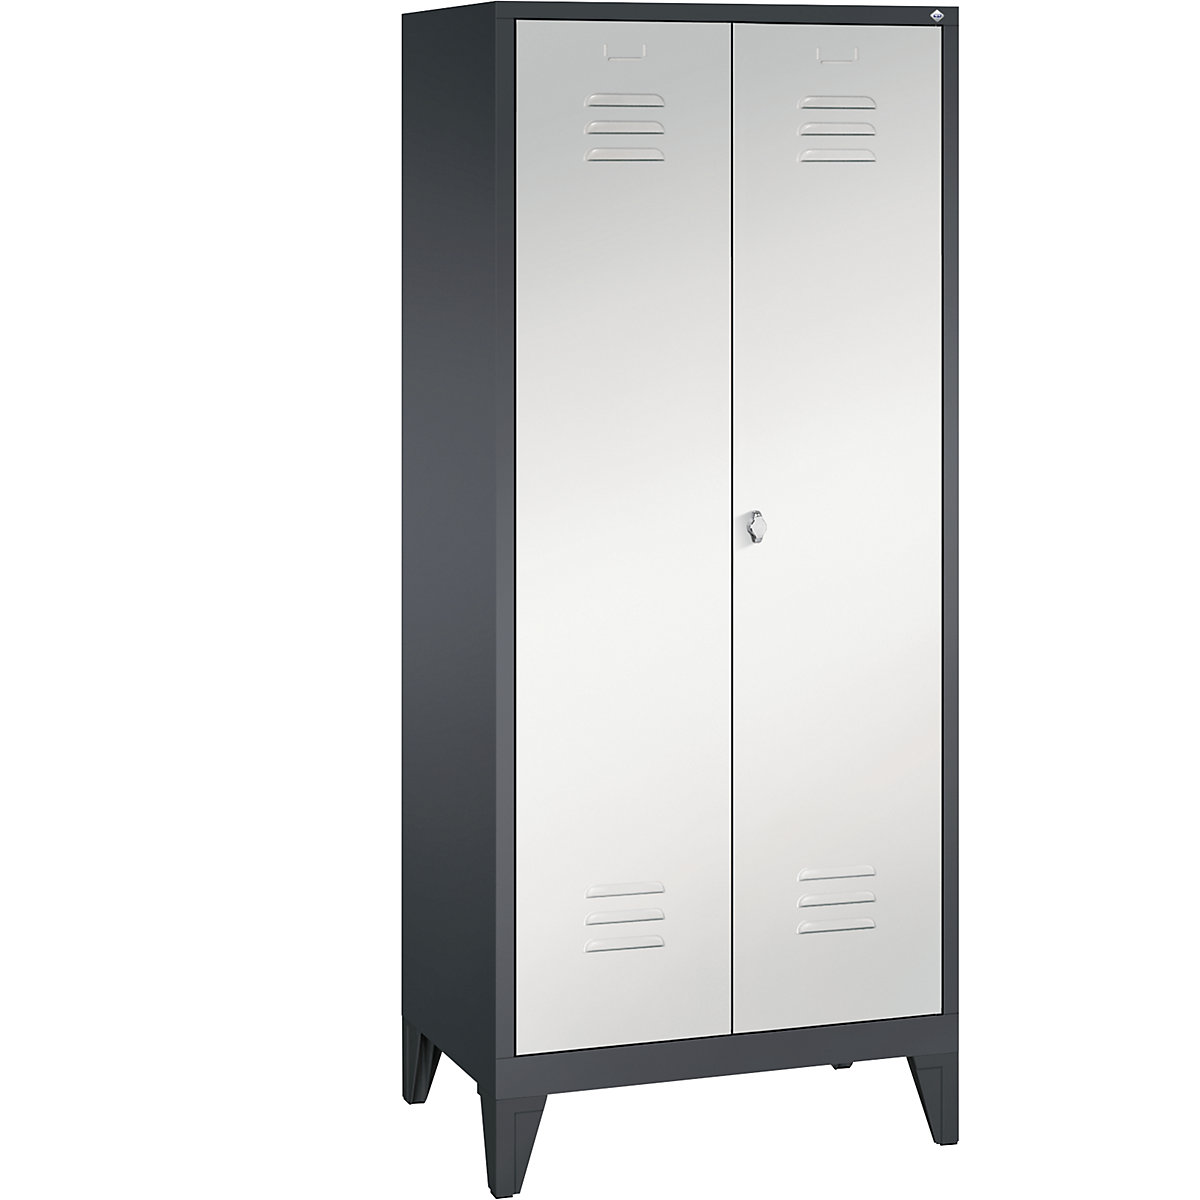 CLASSIC storage cupboard with feet, doors close in the middle – C+P, 2 compartments, compartment width 400 mm, black grey / light grey-12